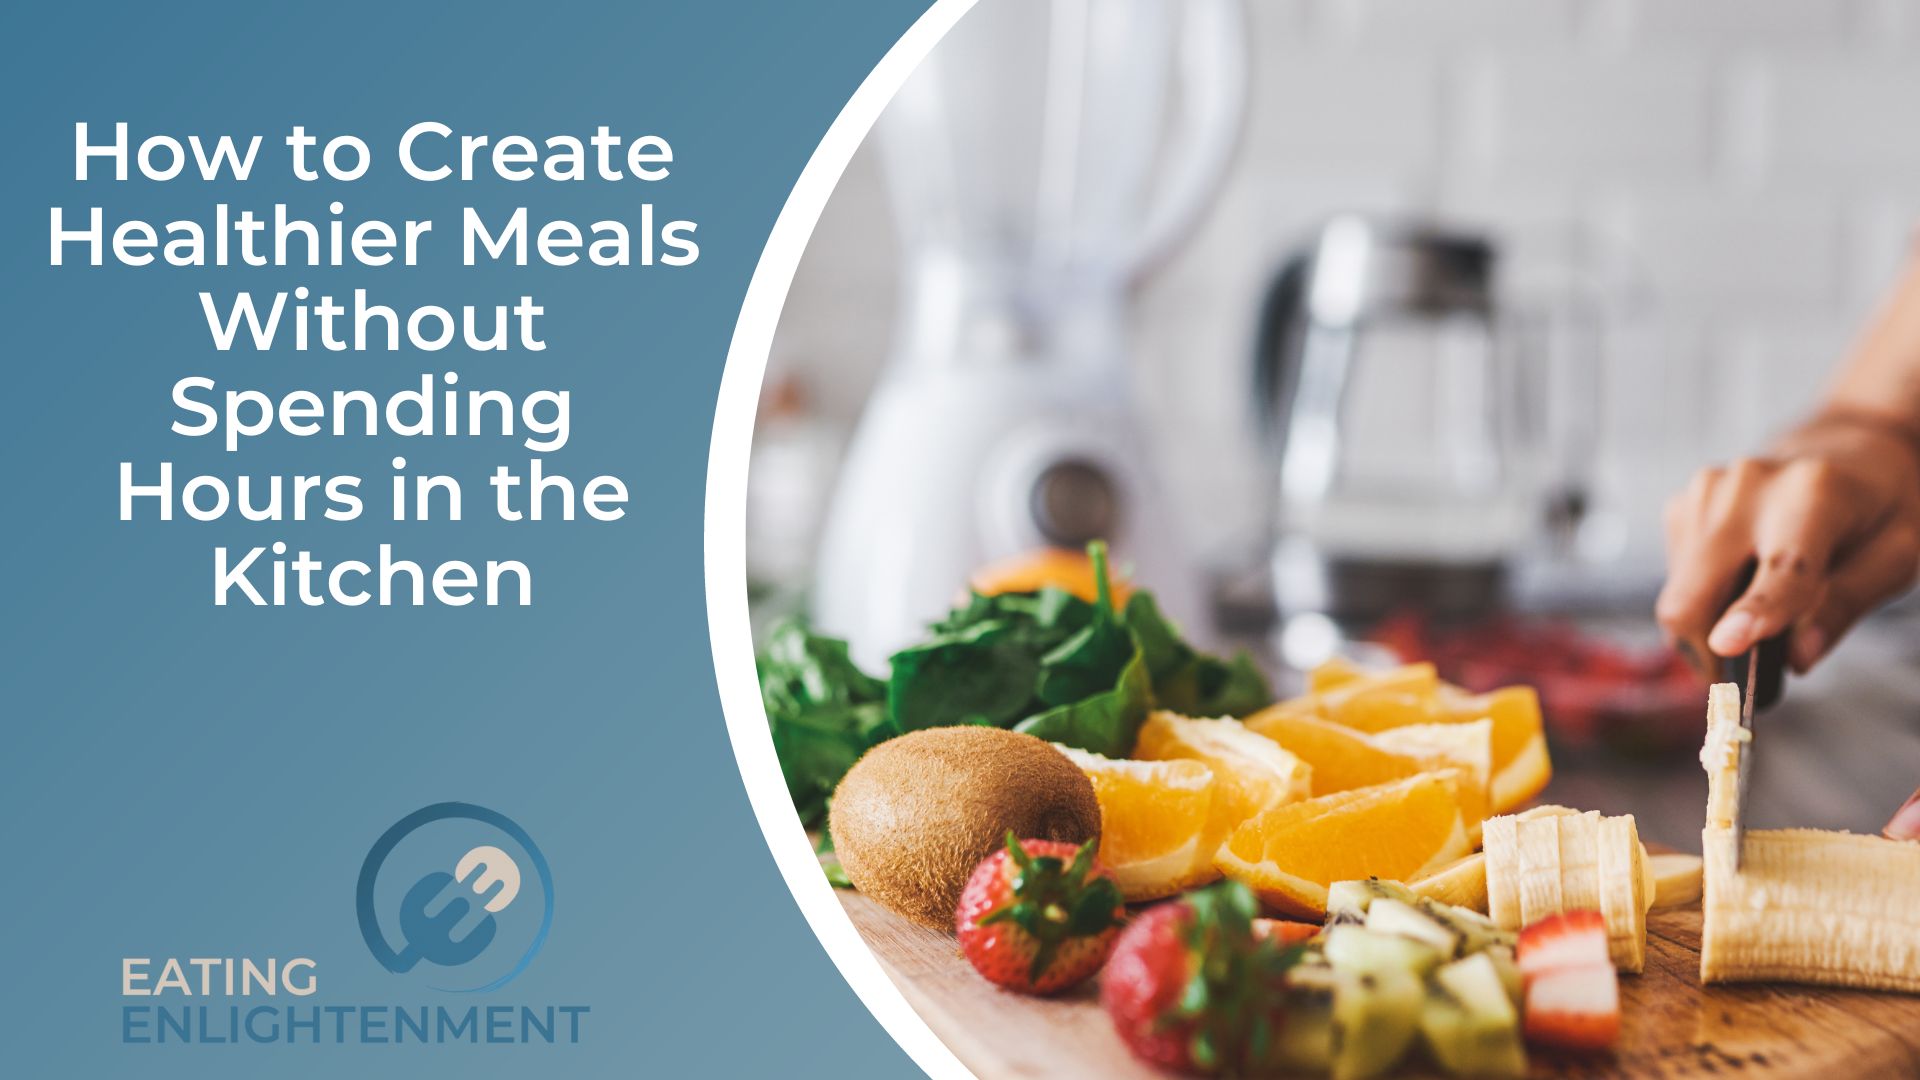 How to Create Healthier Meals Without Spending Hours in the Kitchen (1)